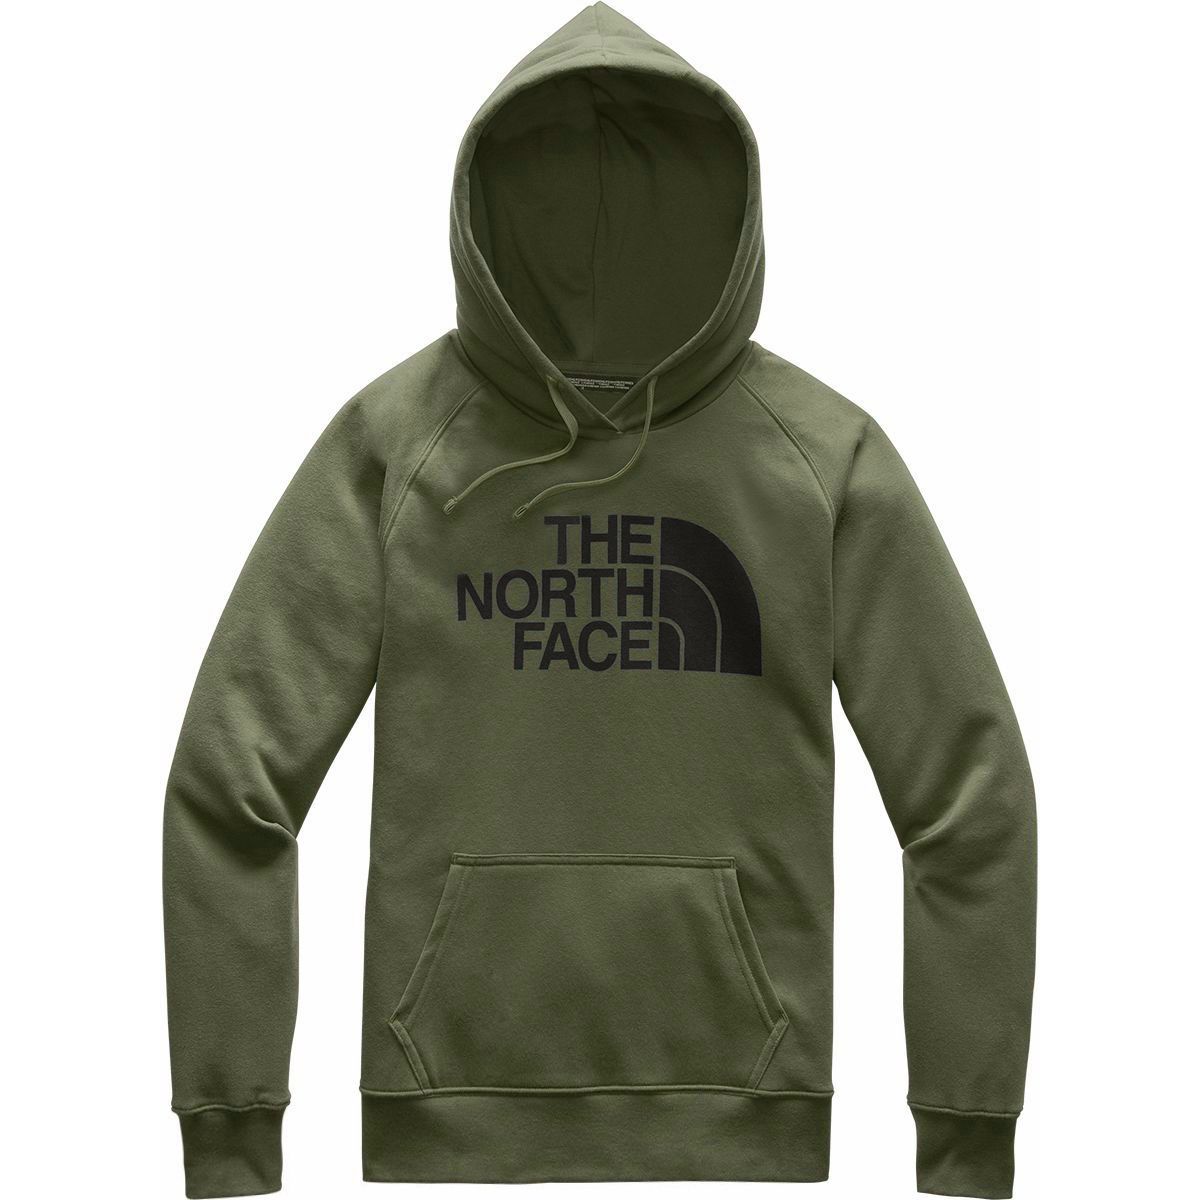 The North Face Half Dome Pullover Hoodie - Women's | Backcountry.com